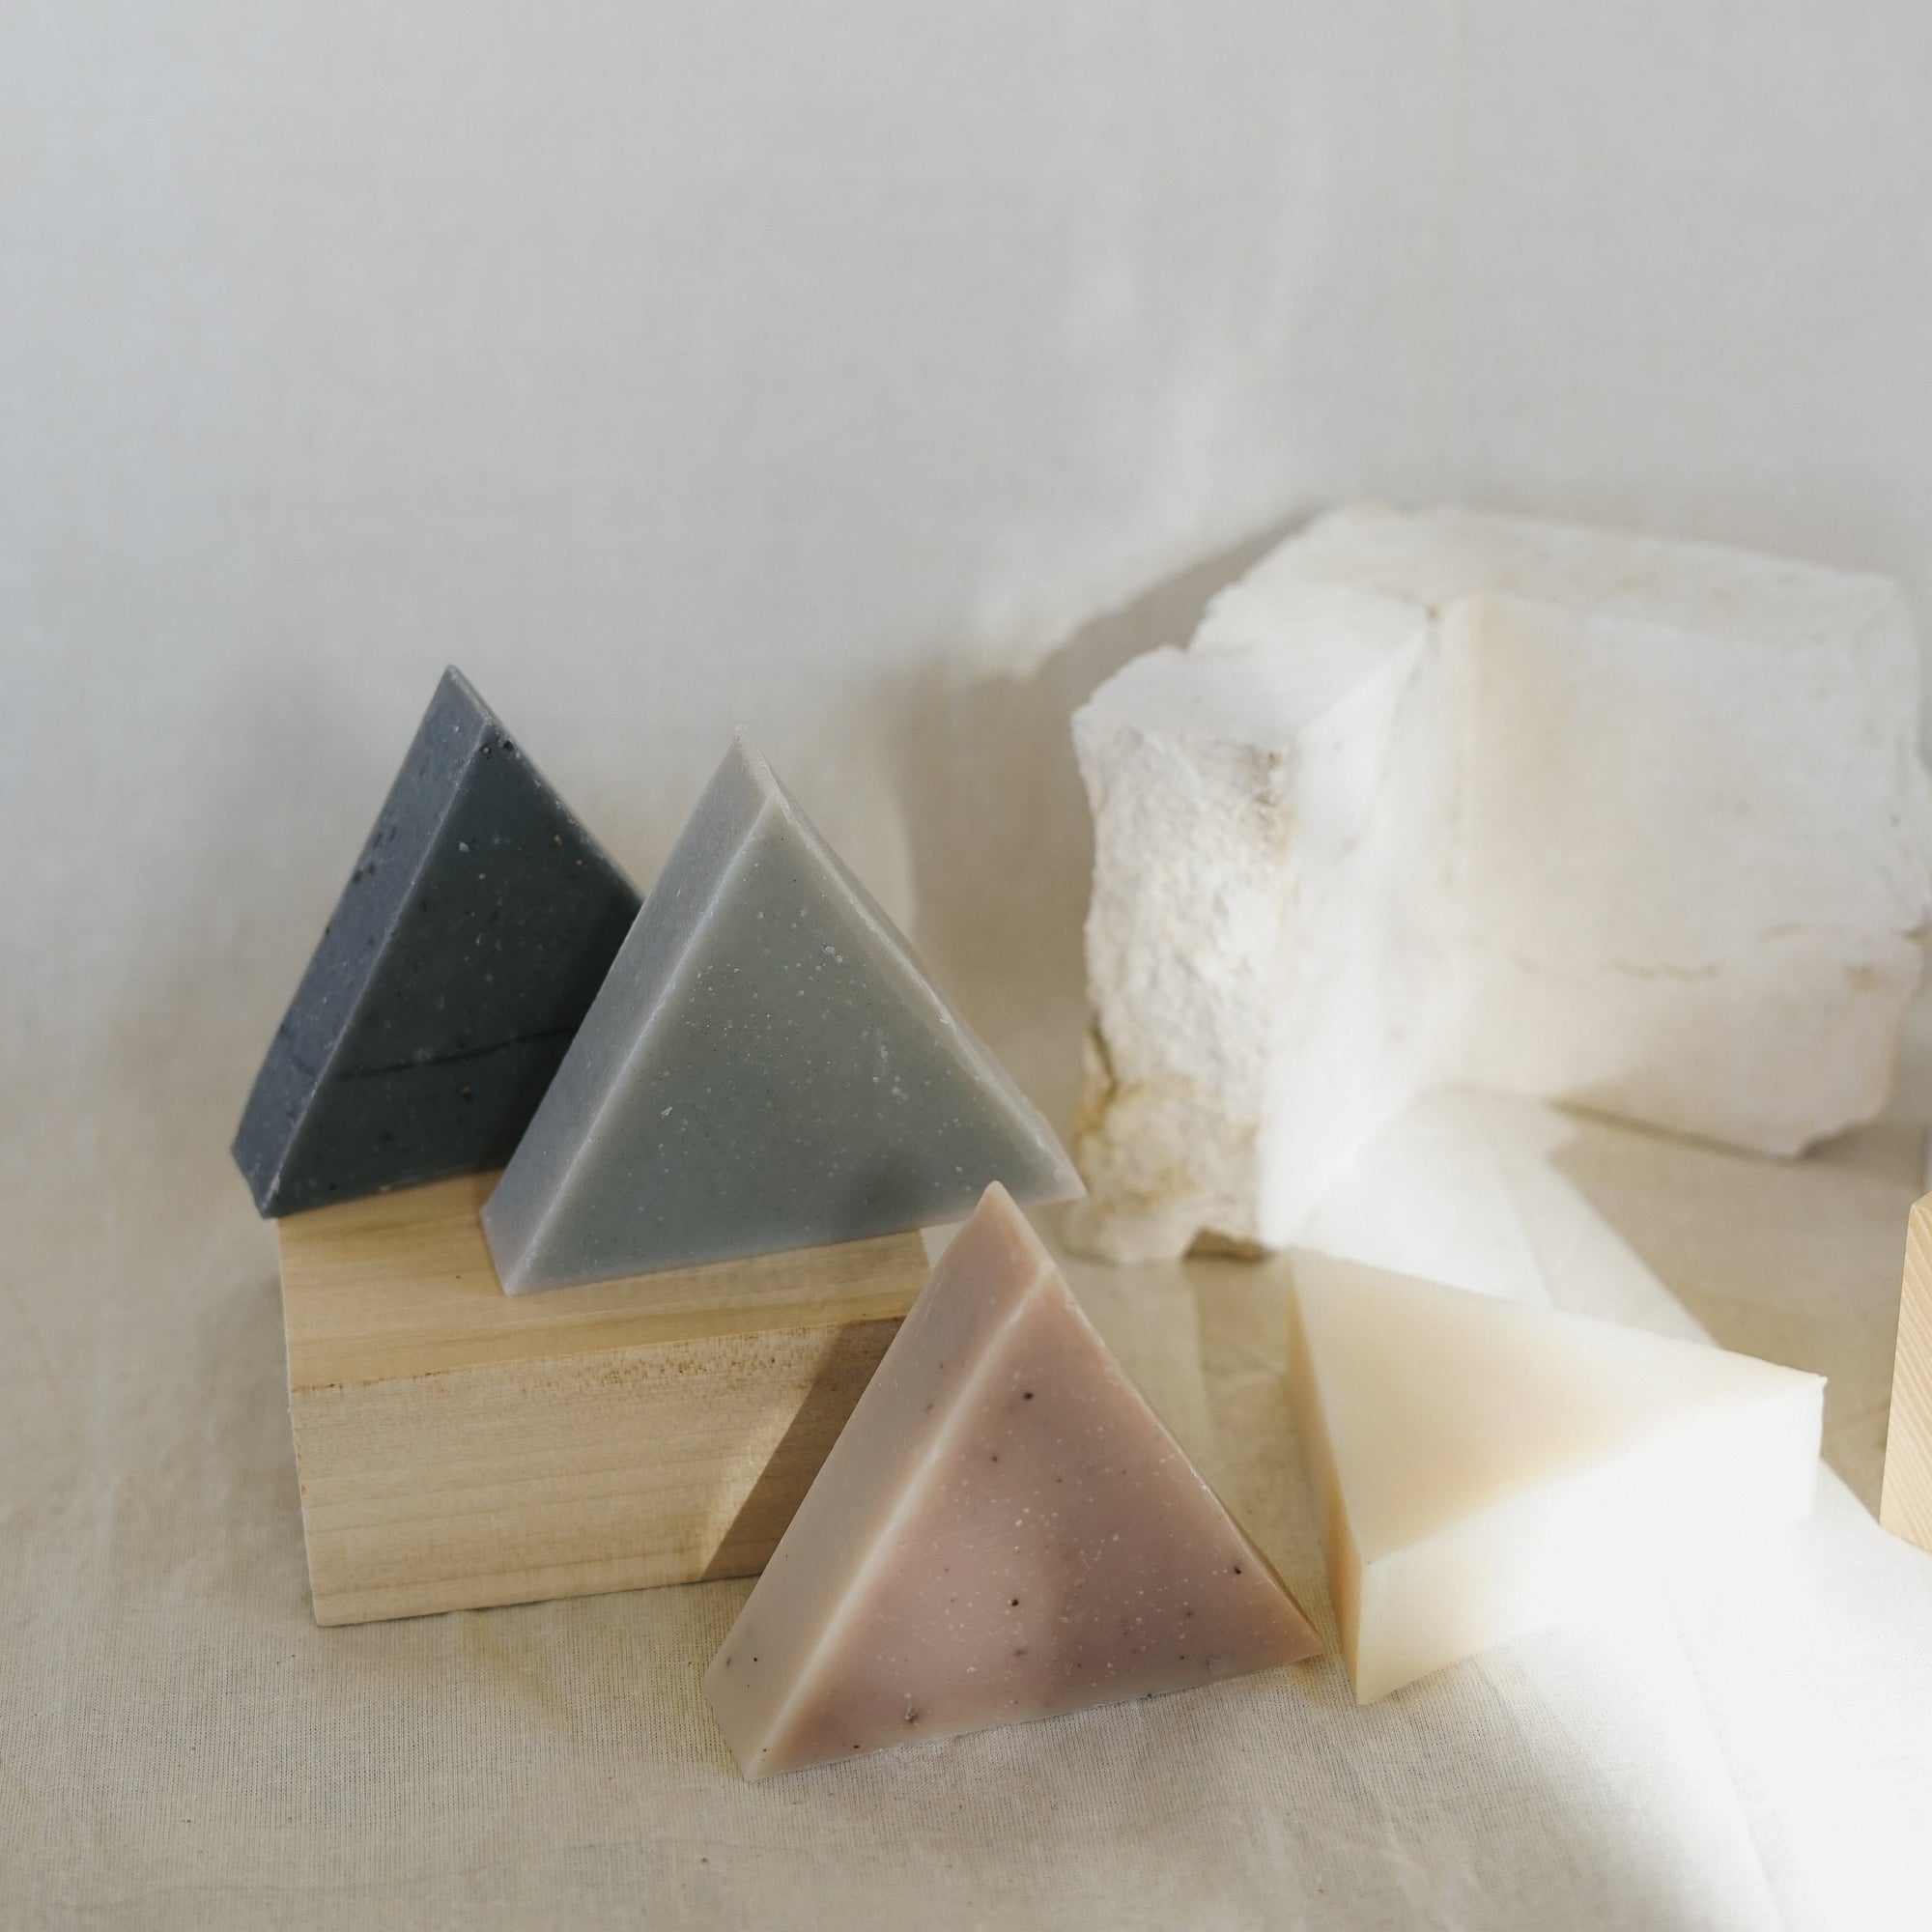 Four triangle soaps balancing on wood and stone